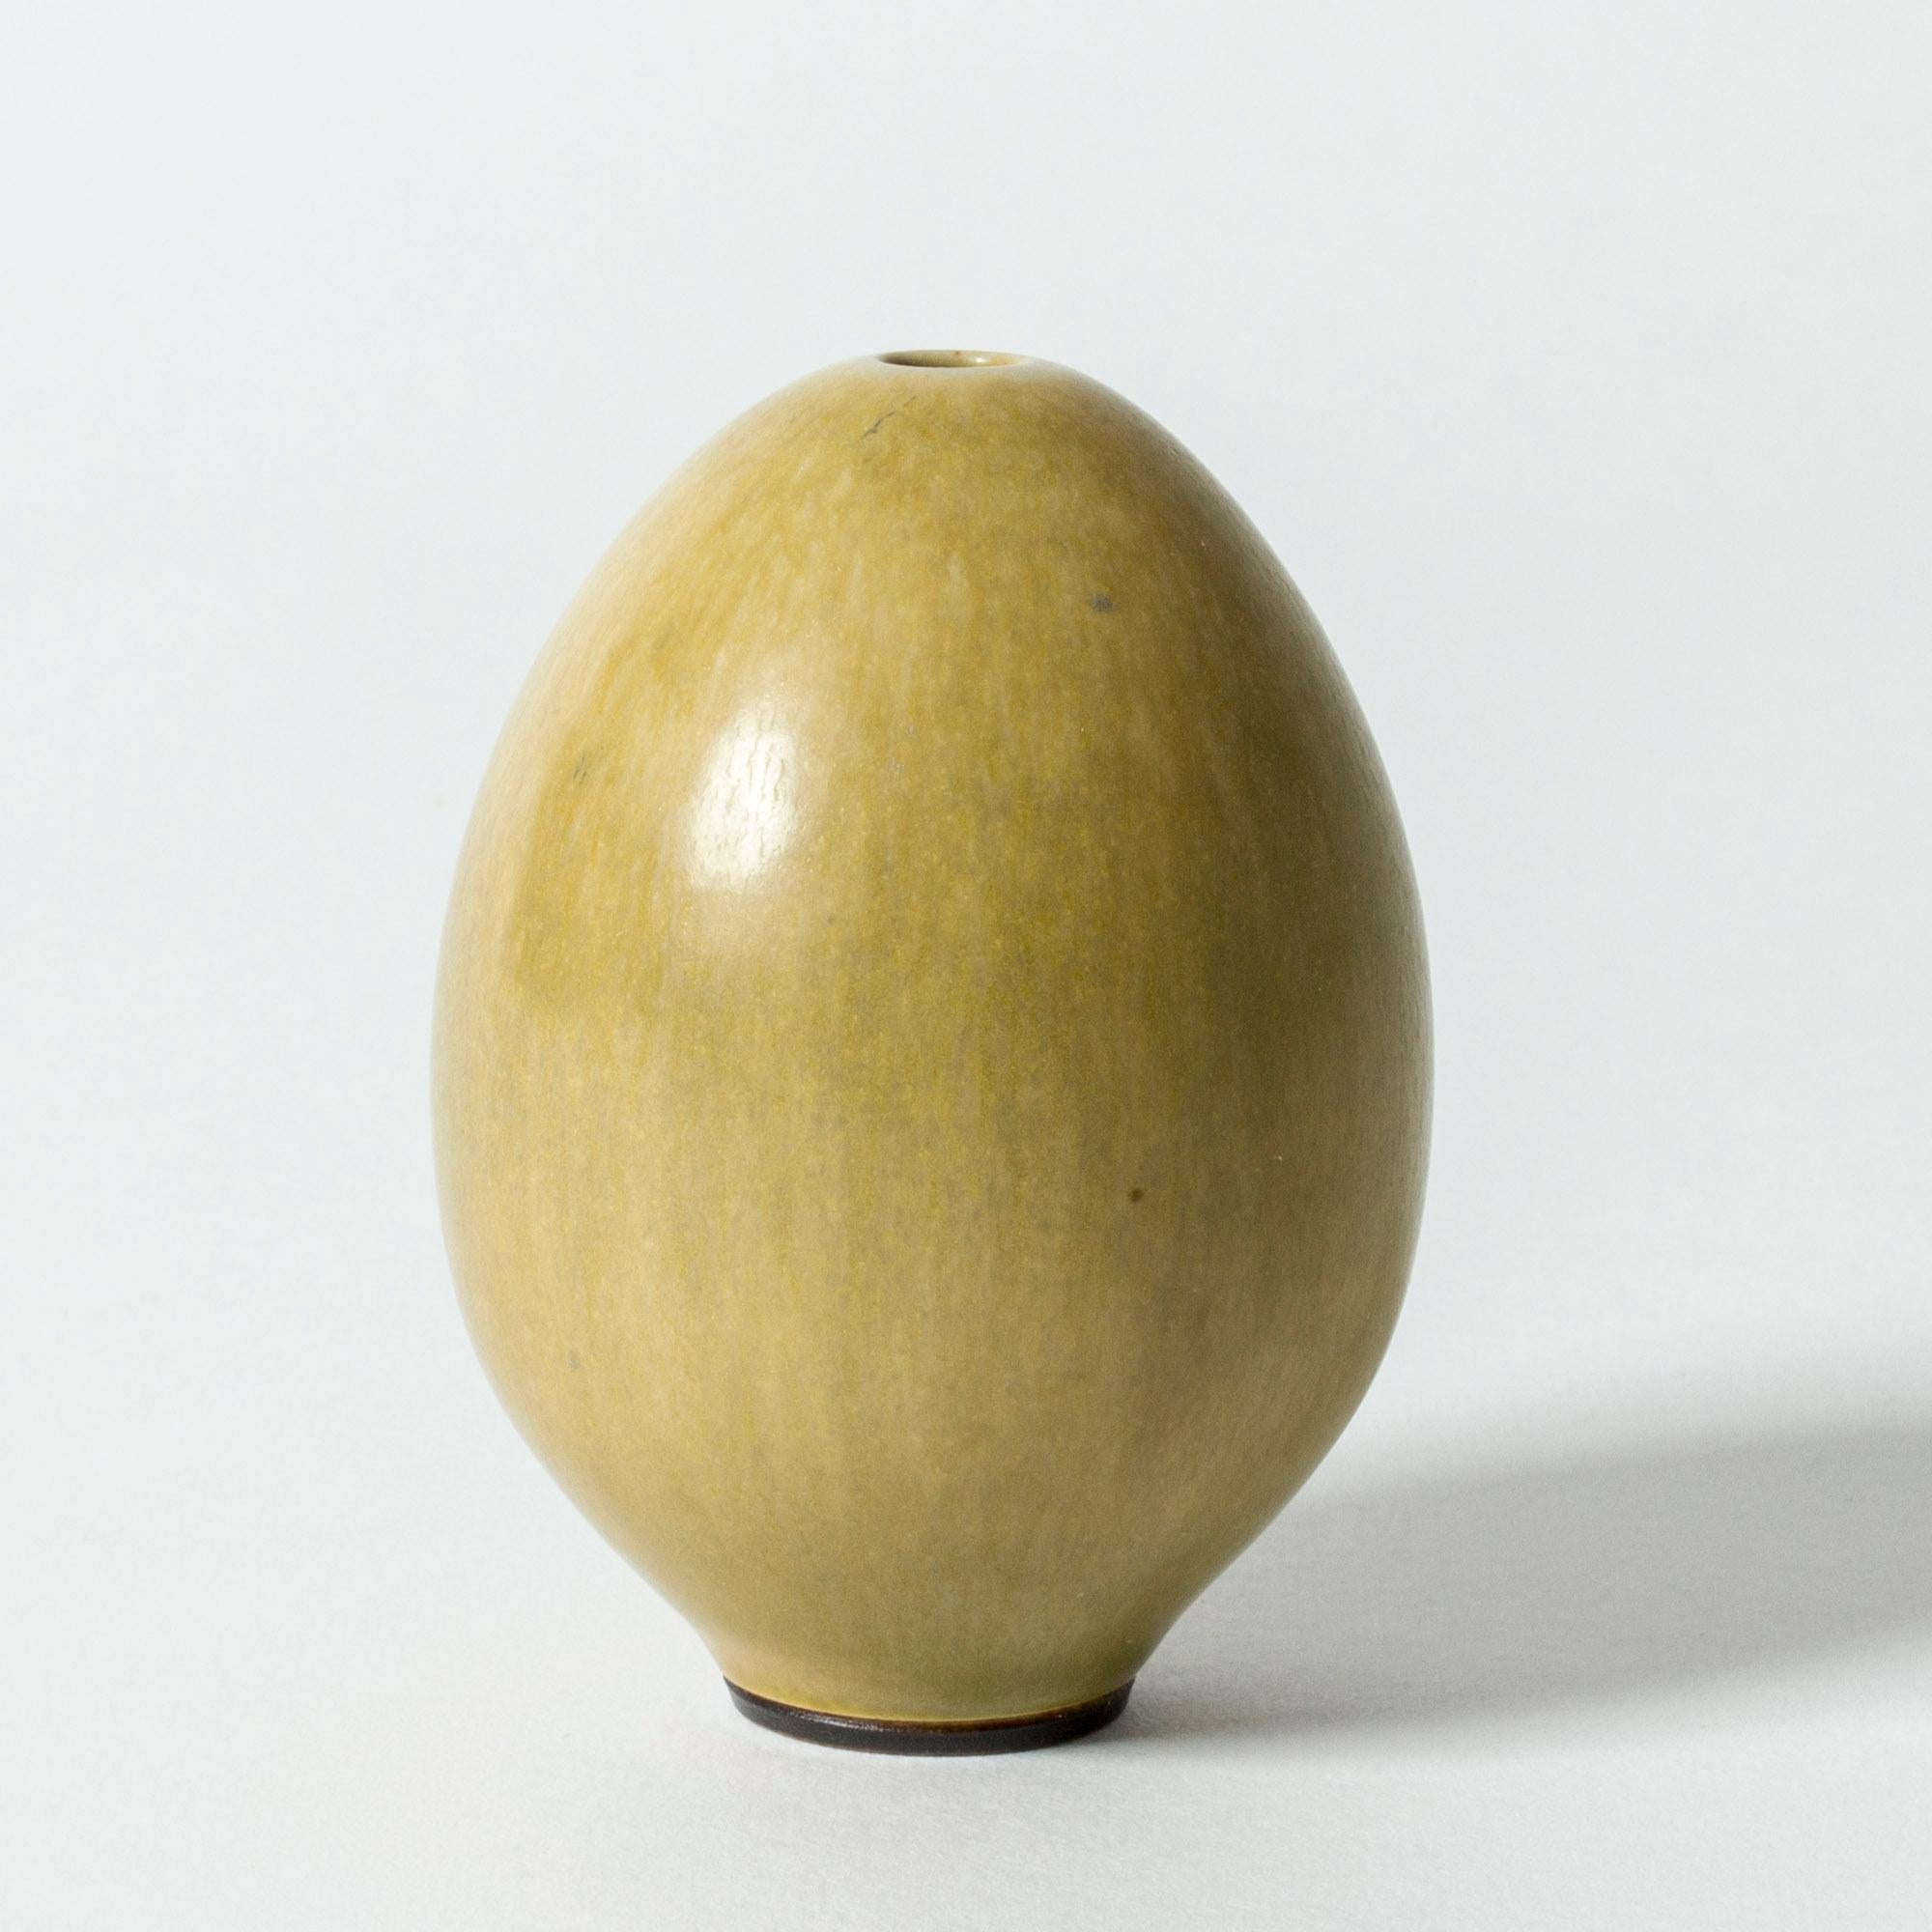 Lovely, small stoneware vase by Berndt Friberg, in the form of an egg. Delicately made, with yellow hare’s fur glaze.

Berndt Friberg was a Swedish ceramicist, renowned for his stoneware vases and vessels for Gustavsberg. His pure, composed designs